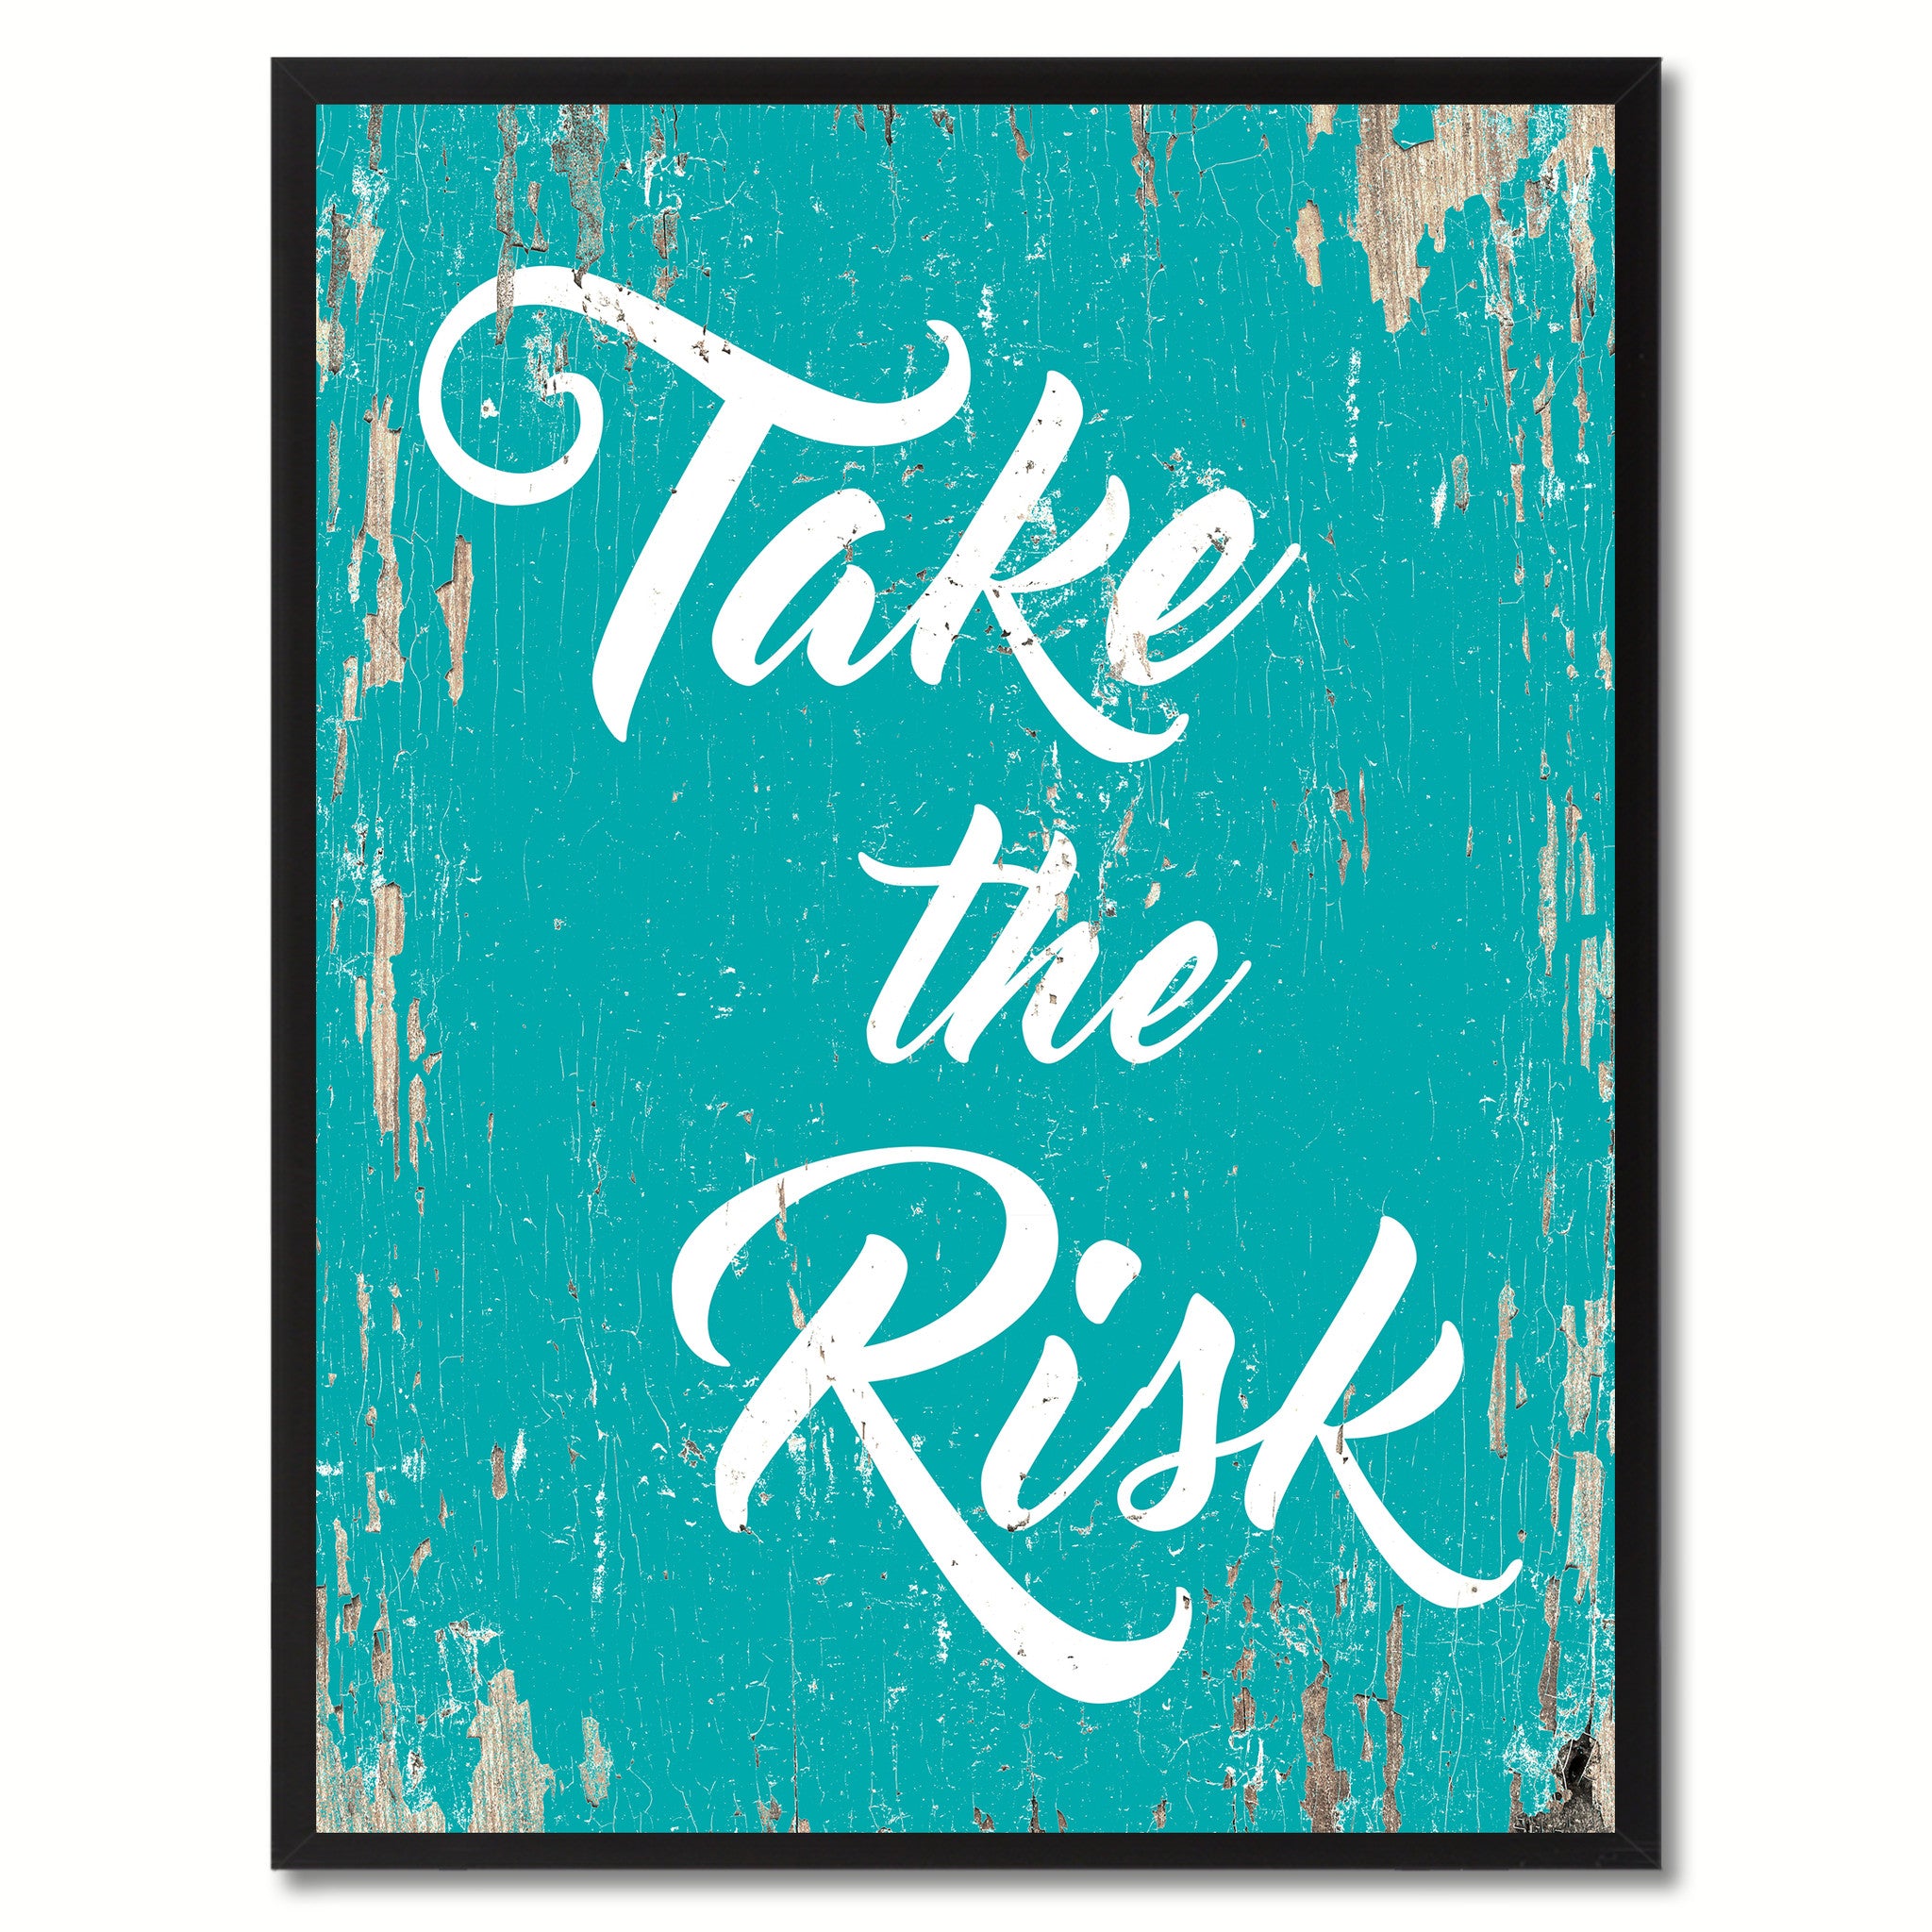 Take The Risk Saying Canvas Print, Black Picture Frame Home Decor Wall Art Gifts